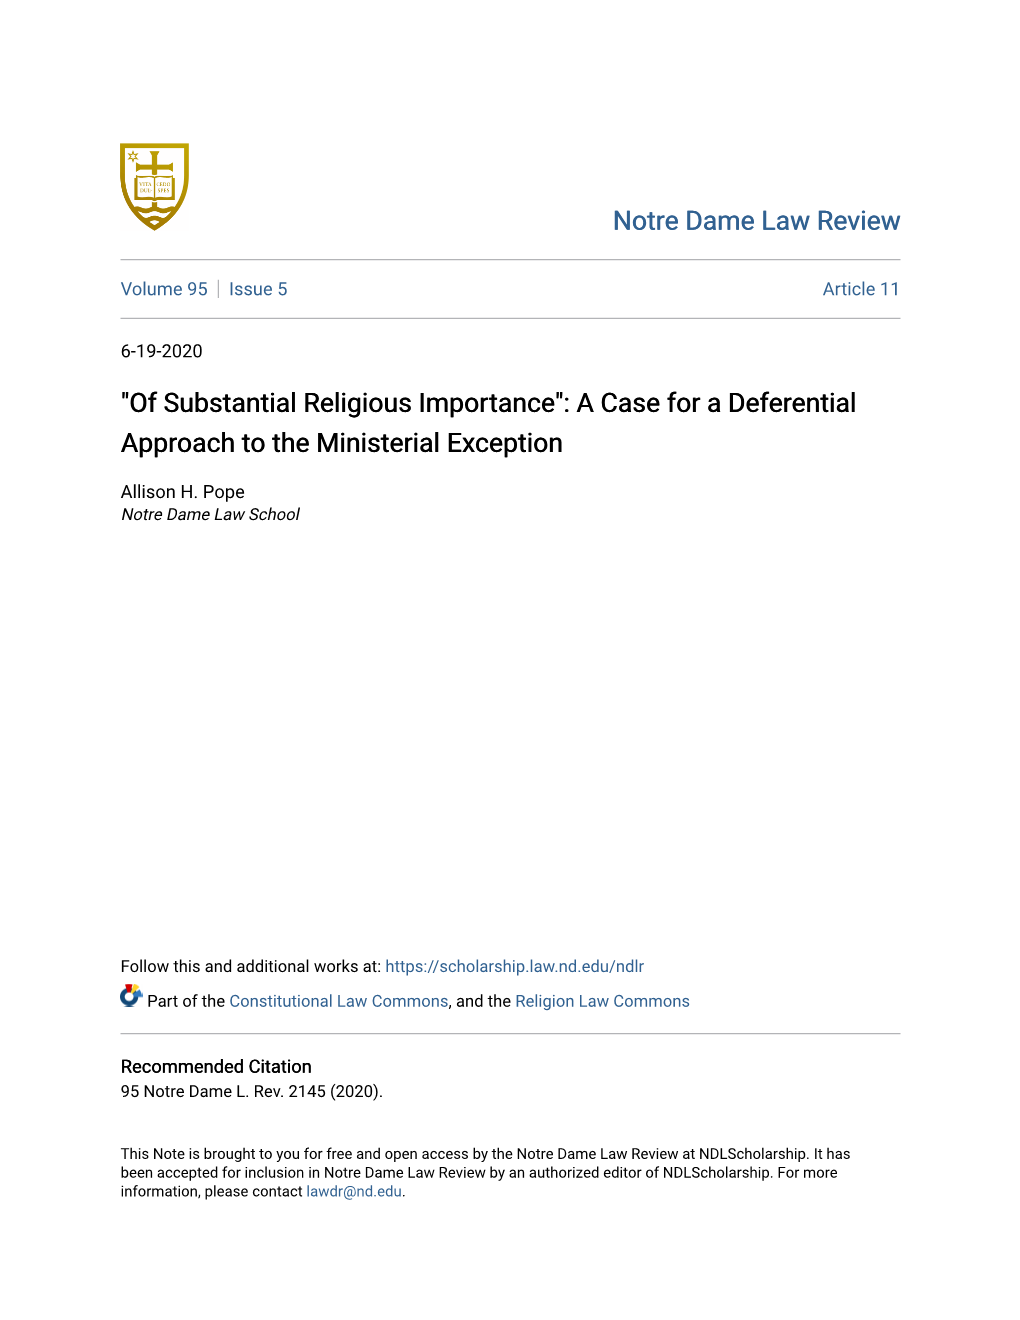 "Of Substantial Religious Importance": a Case for a Deferential Approach to the Ministerial Exception